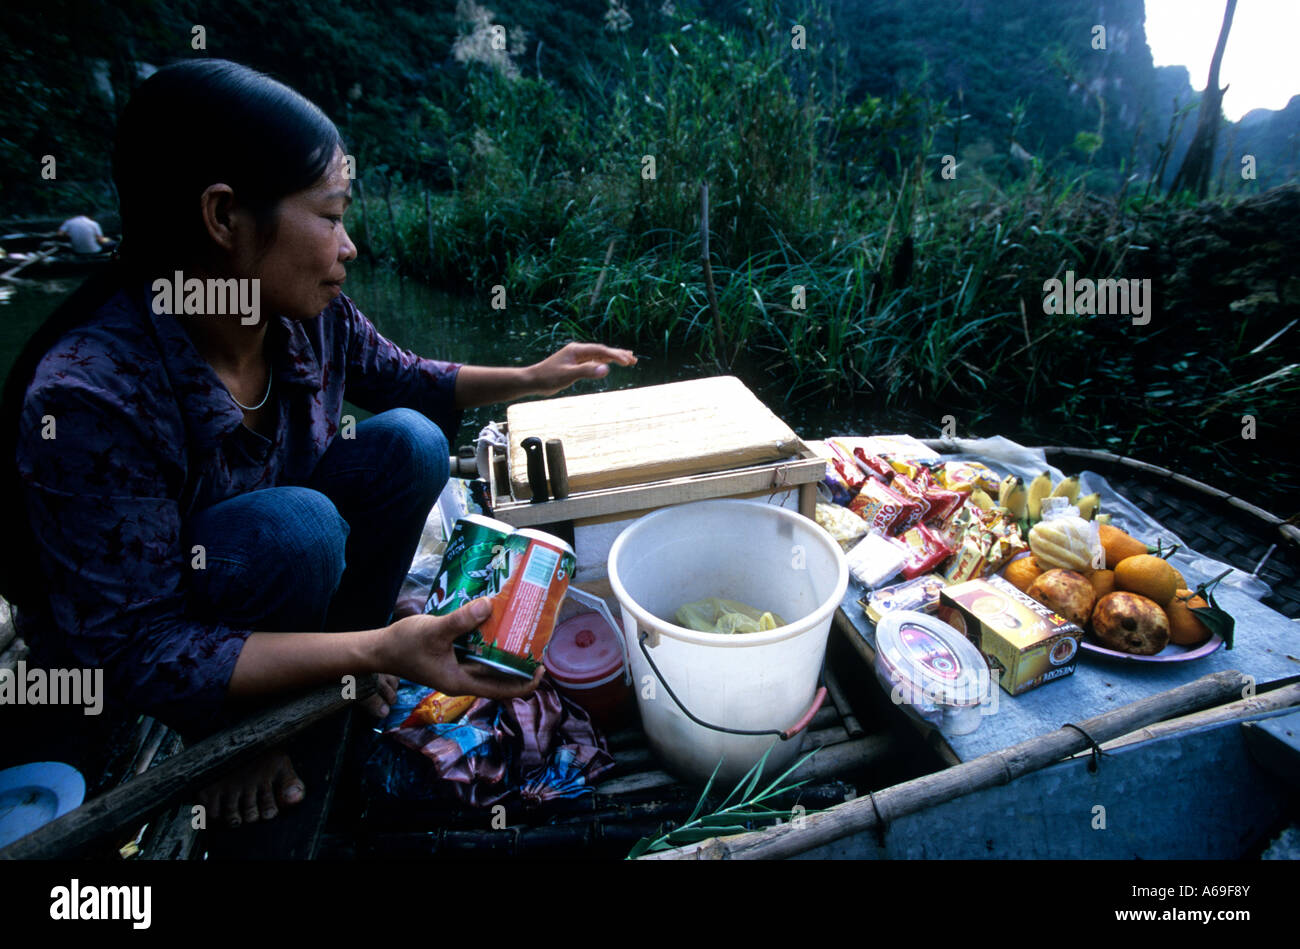 Woman in rowboat selling snacks and softdrinks to tourists, Ngo Dong River, Tam Coc., Vietnam. Stock Photo